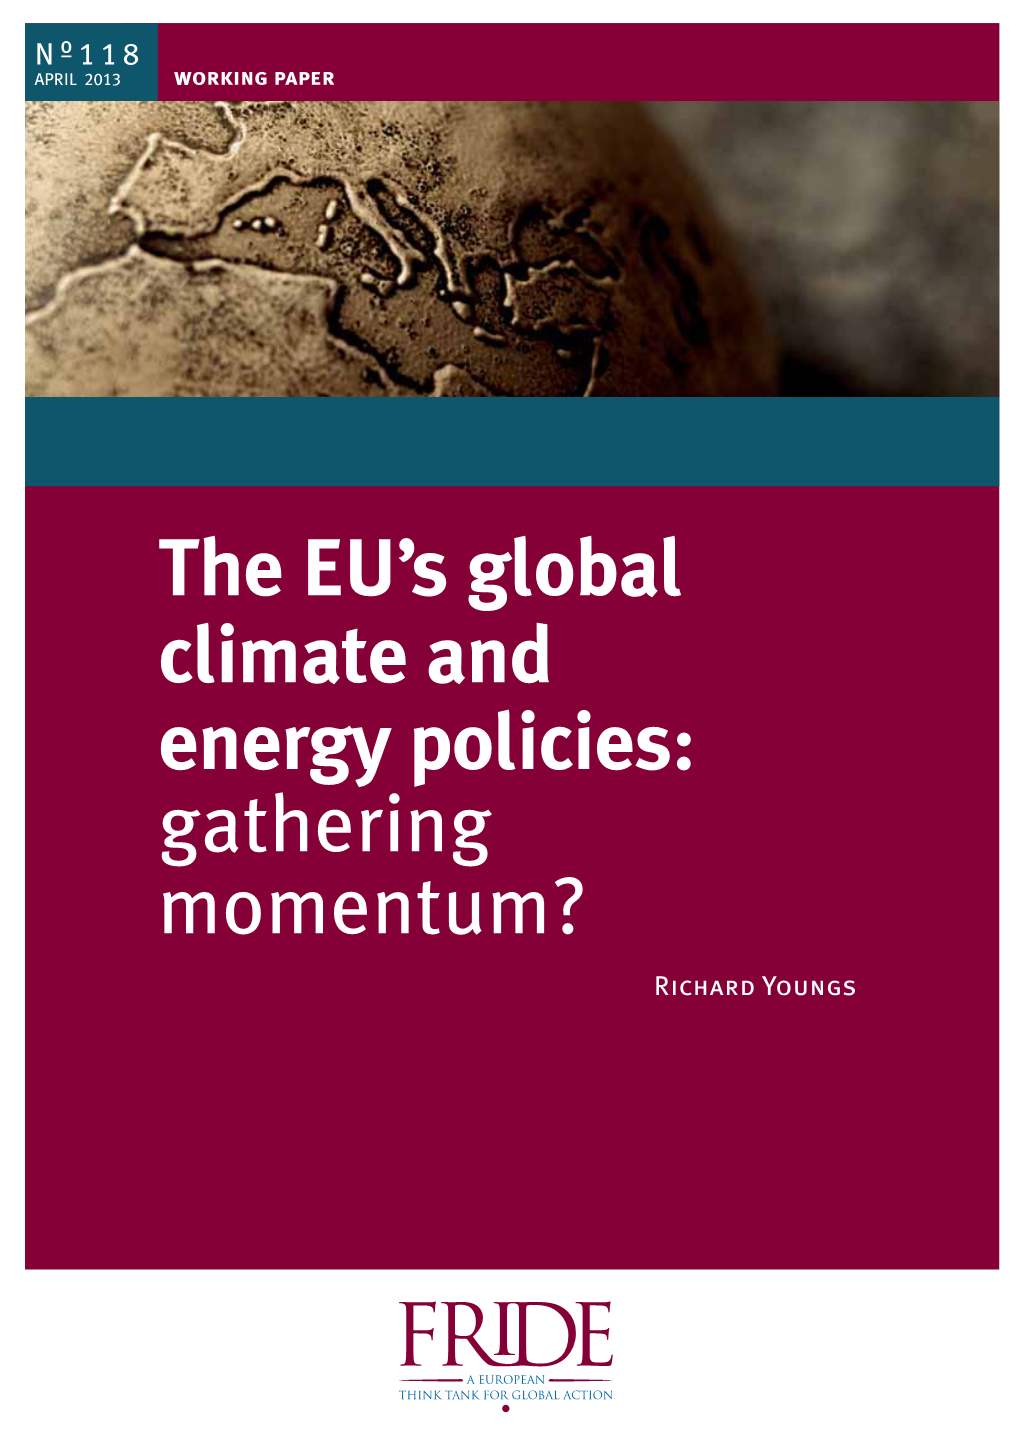 The EU's Global Climate and Energy Policies: Gathering Momentum?